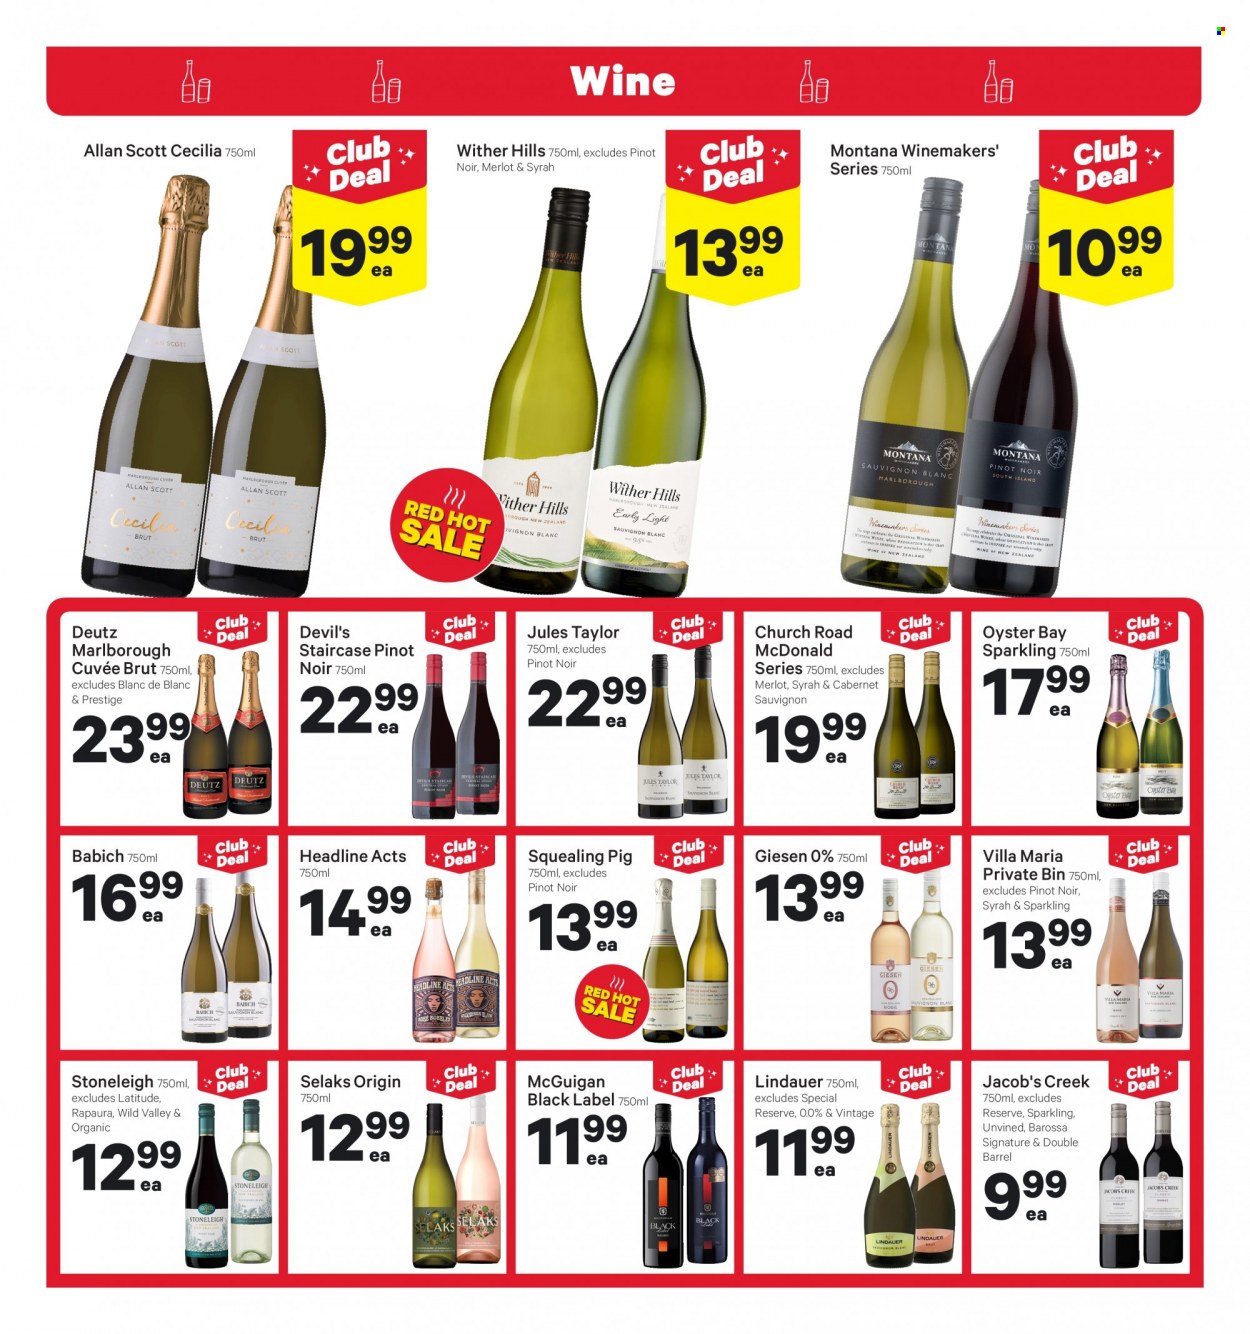 thumbnail - New World mailer - 23.01.2023 - 29.01.2023 - Sales products - oysters, Cabernet Sauvignon, red wine, sparkling wine, wine, Merlot, Pinot Noir, Cuvée, Lindauer, Jules Taylor, Wither Hills, Syrah, Jacob's Creek, Scott, Brut, bin, Hill's. Page 21.